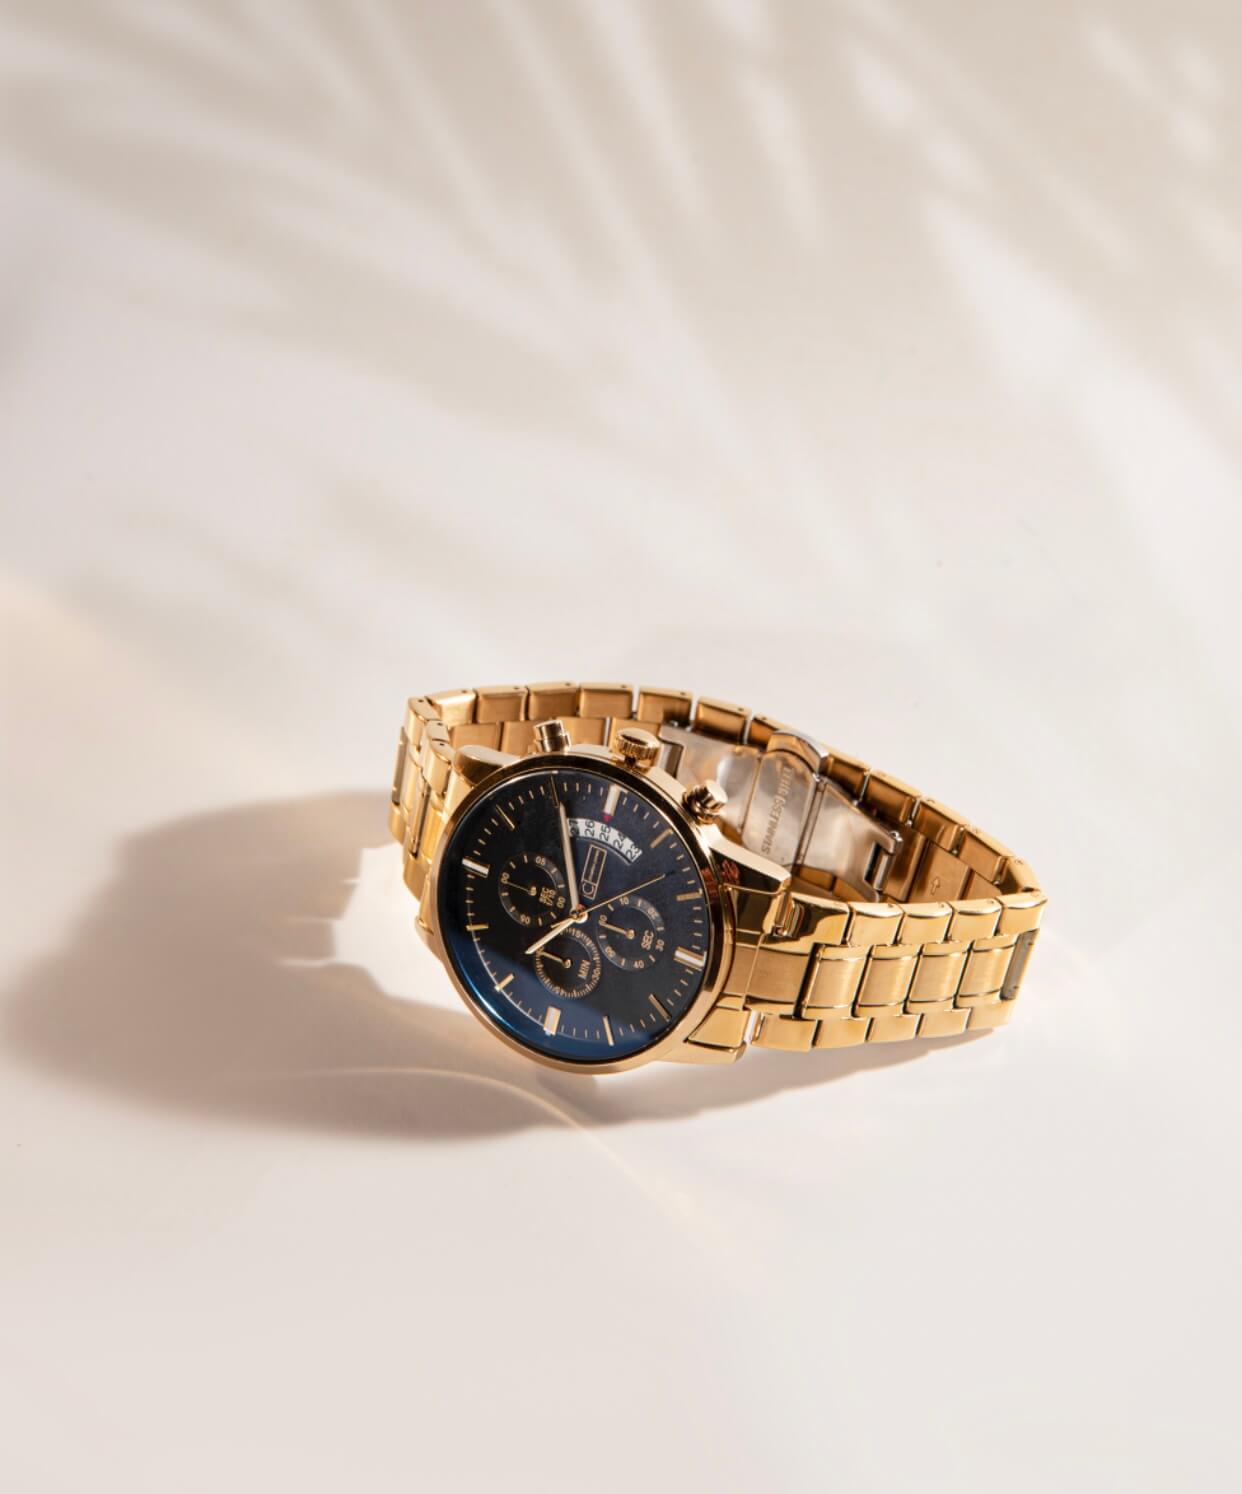 An up-close photo of the timepiece Trident. The watch has a round blue face and a striking gold link band. The hands, hour markers, and dials are also gold. 